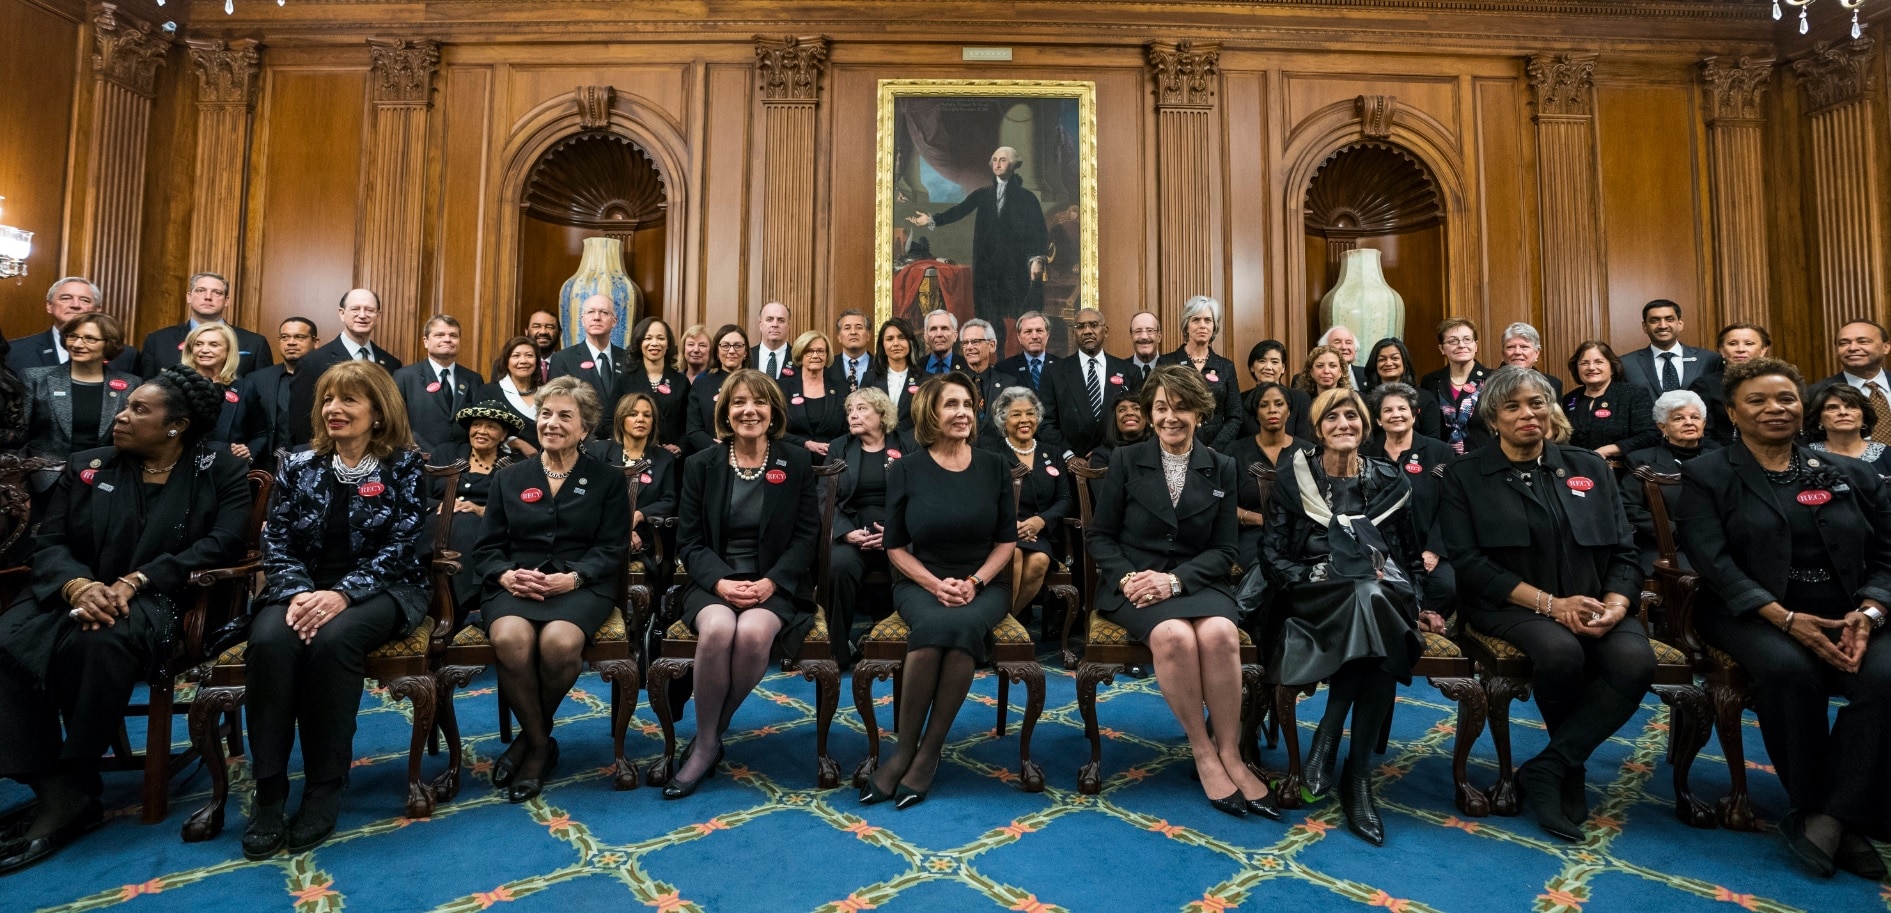 Democratic House Minority Leader Nancy Pelosi (C), along with Democratic members of the House and Senate, pose for photographs while wearing black (AAP)